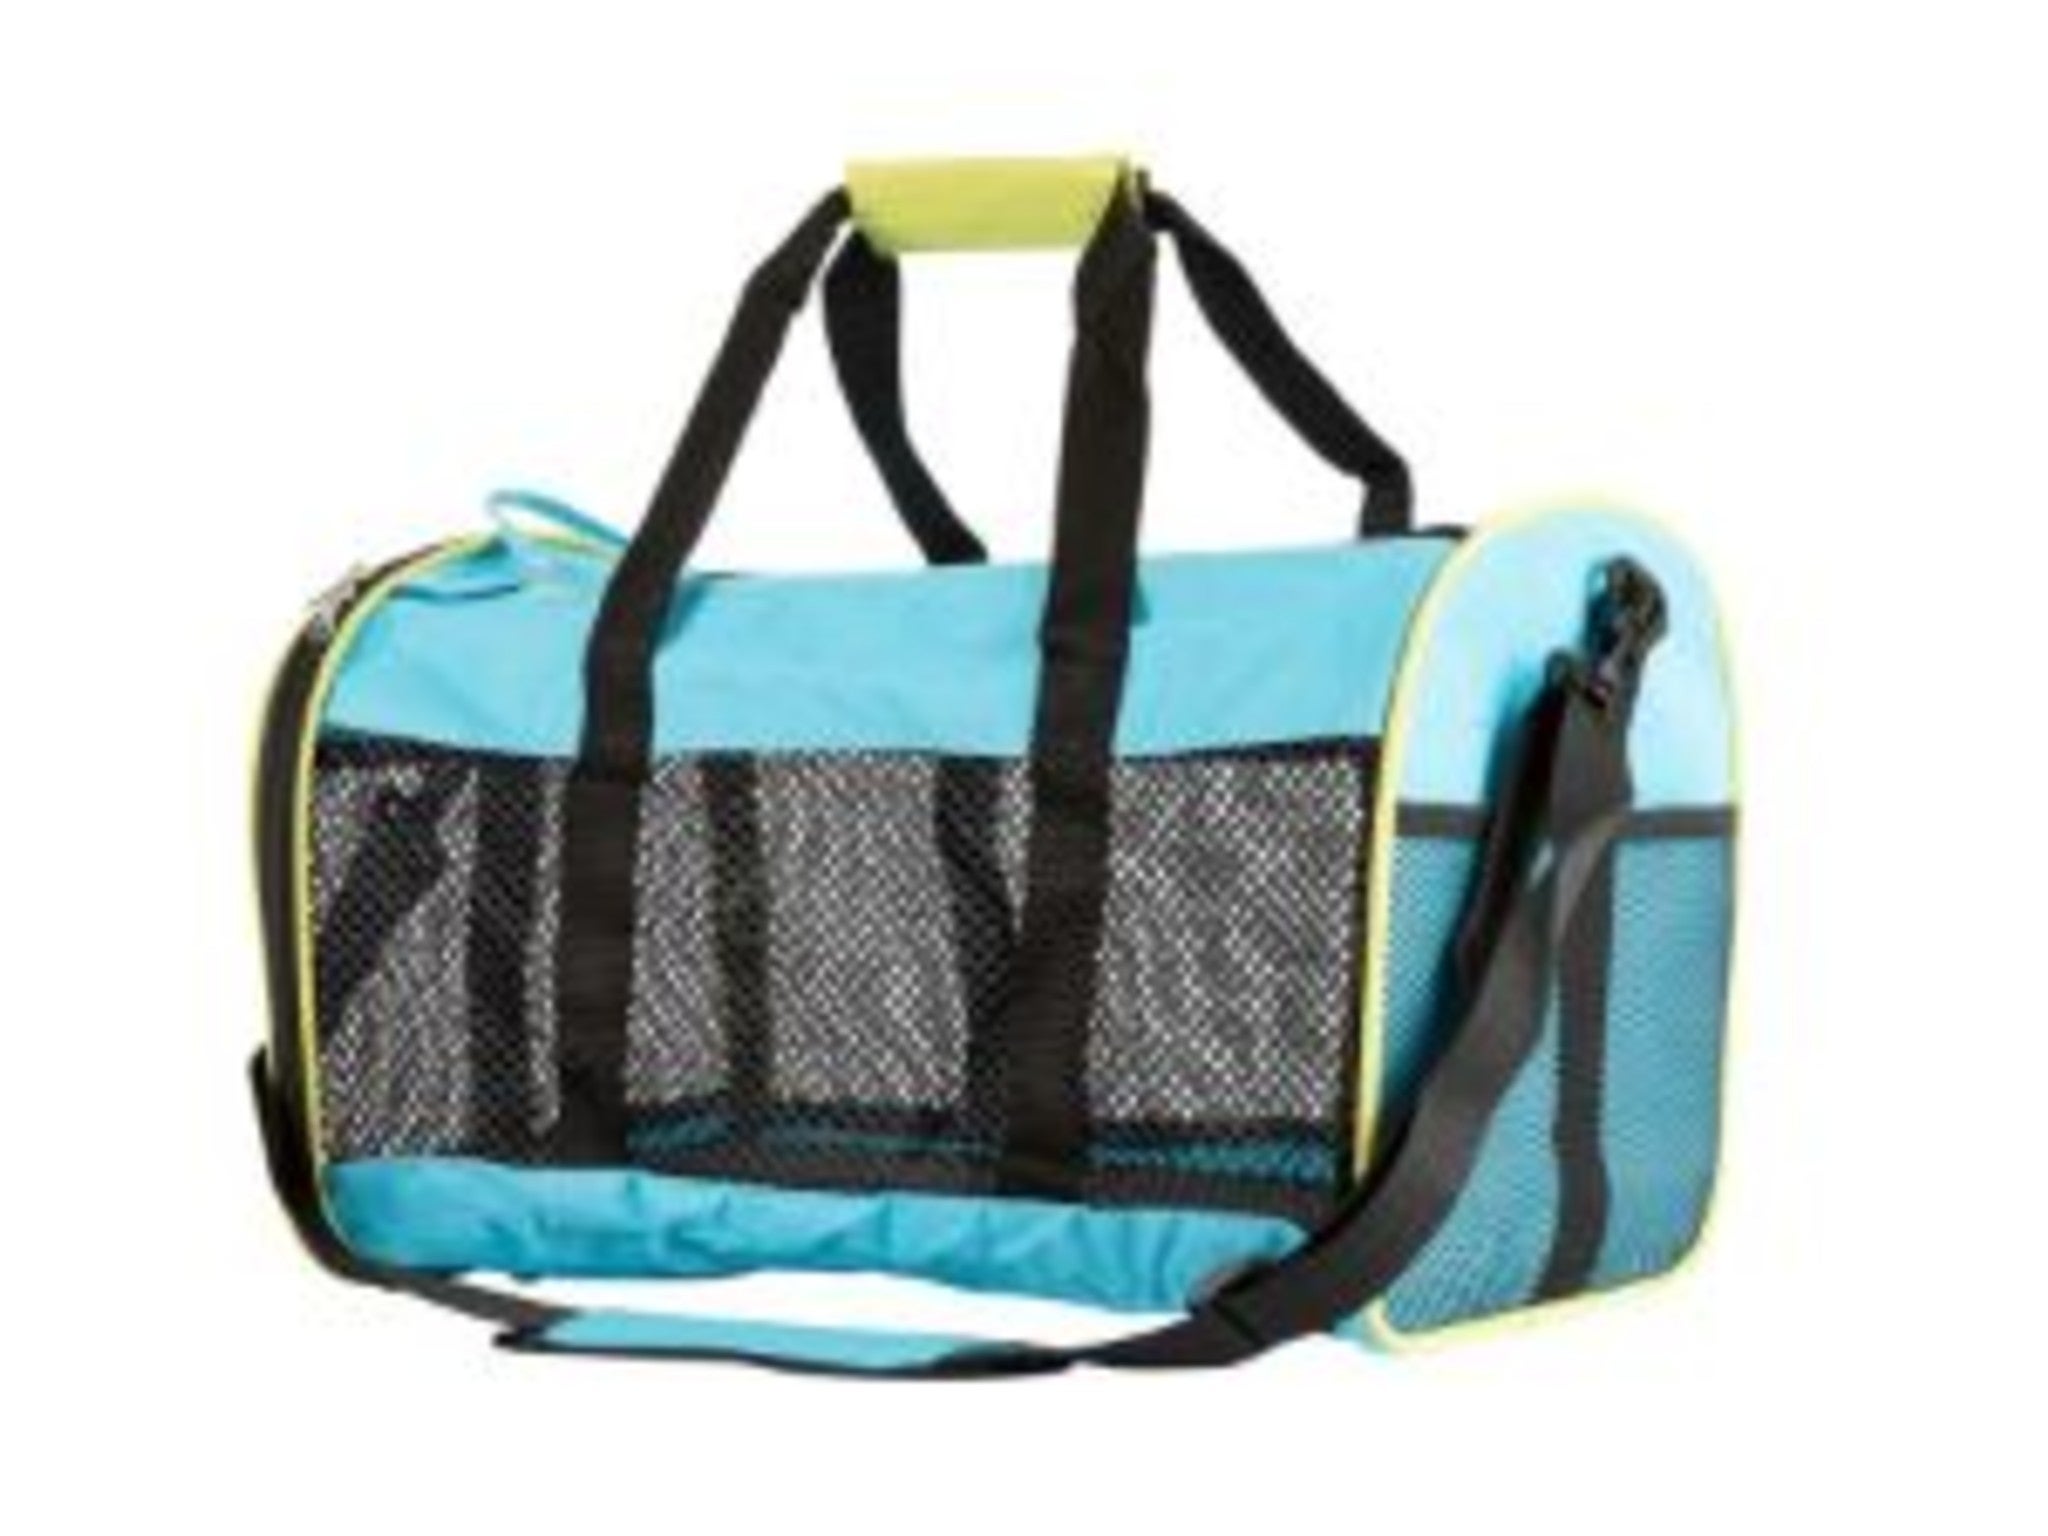 Pets at Home bright blue fabric pet carrier indybest.jpg